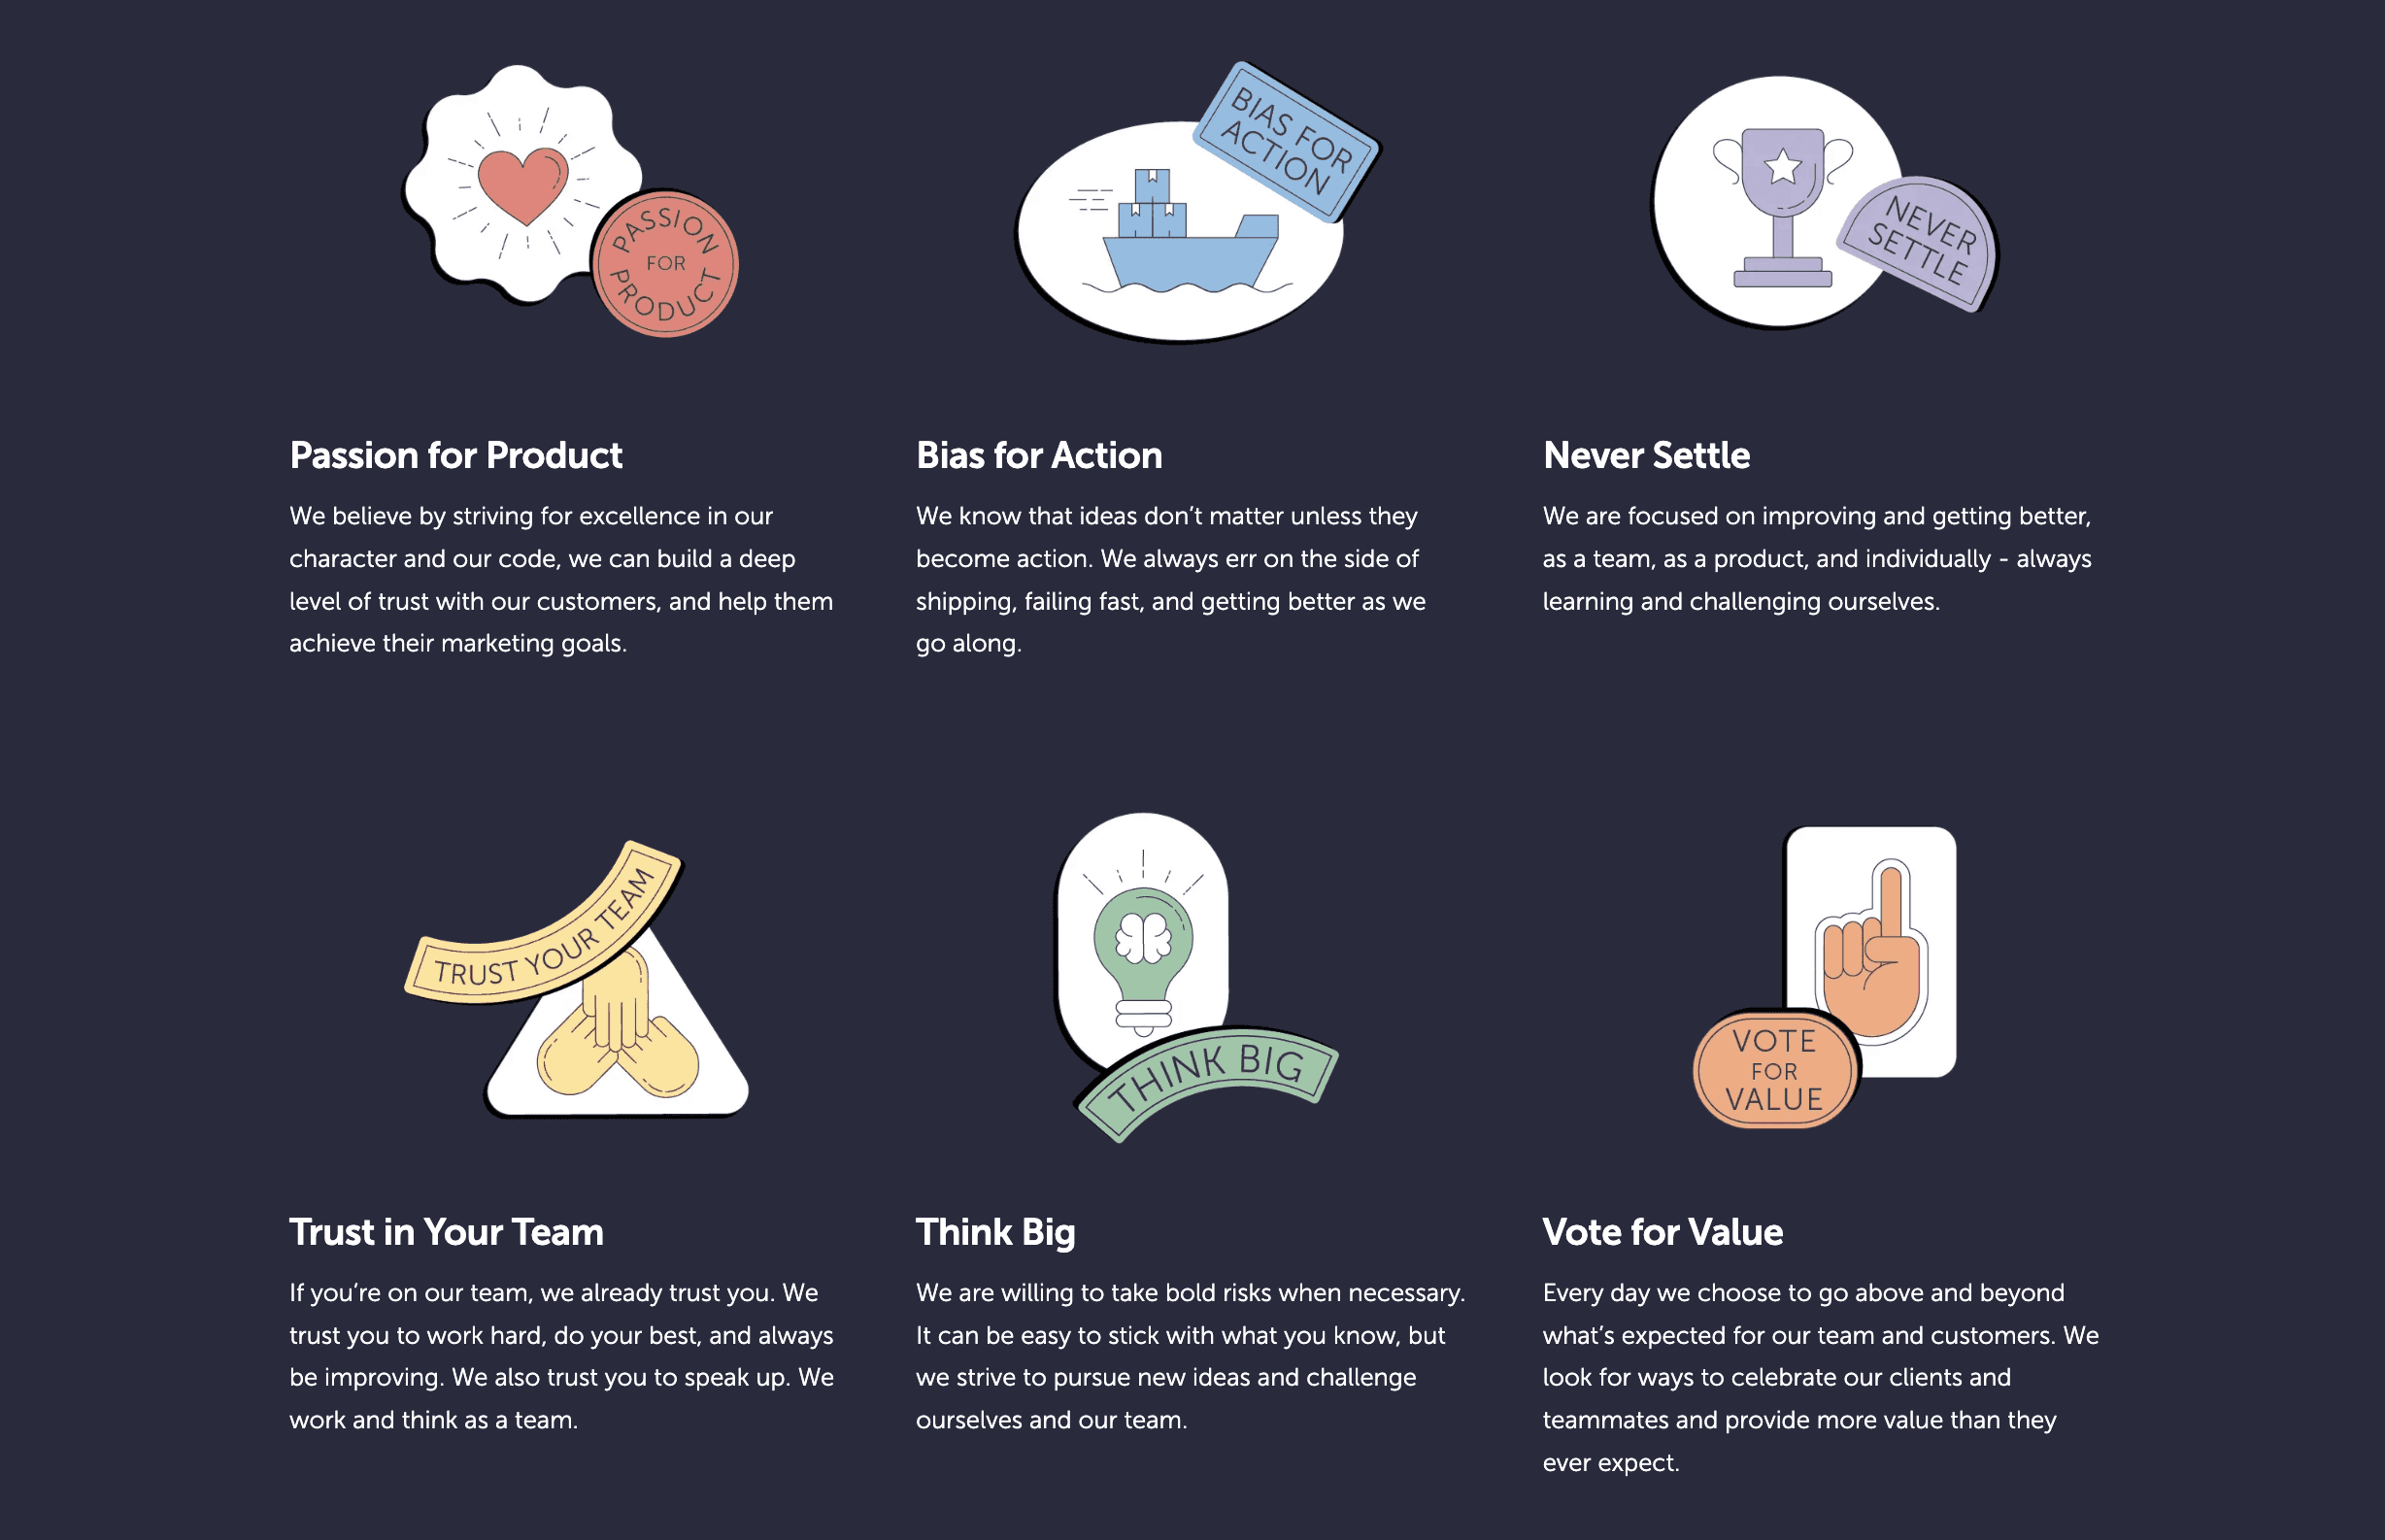 The six core values of CoSchedule listed which are passion for product, bias for action, never settle, trust in your team, think big, and vote for value.